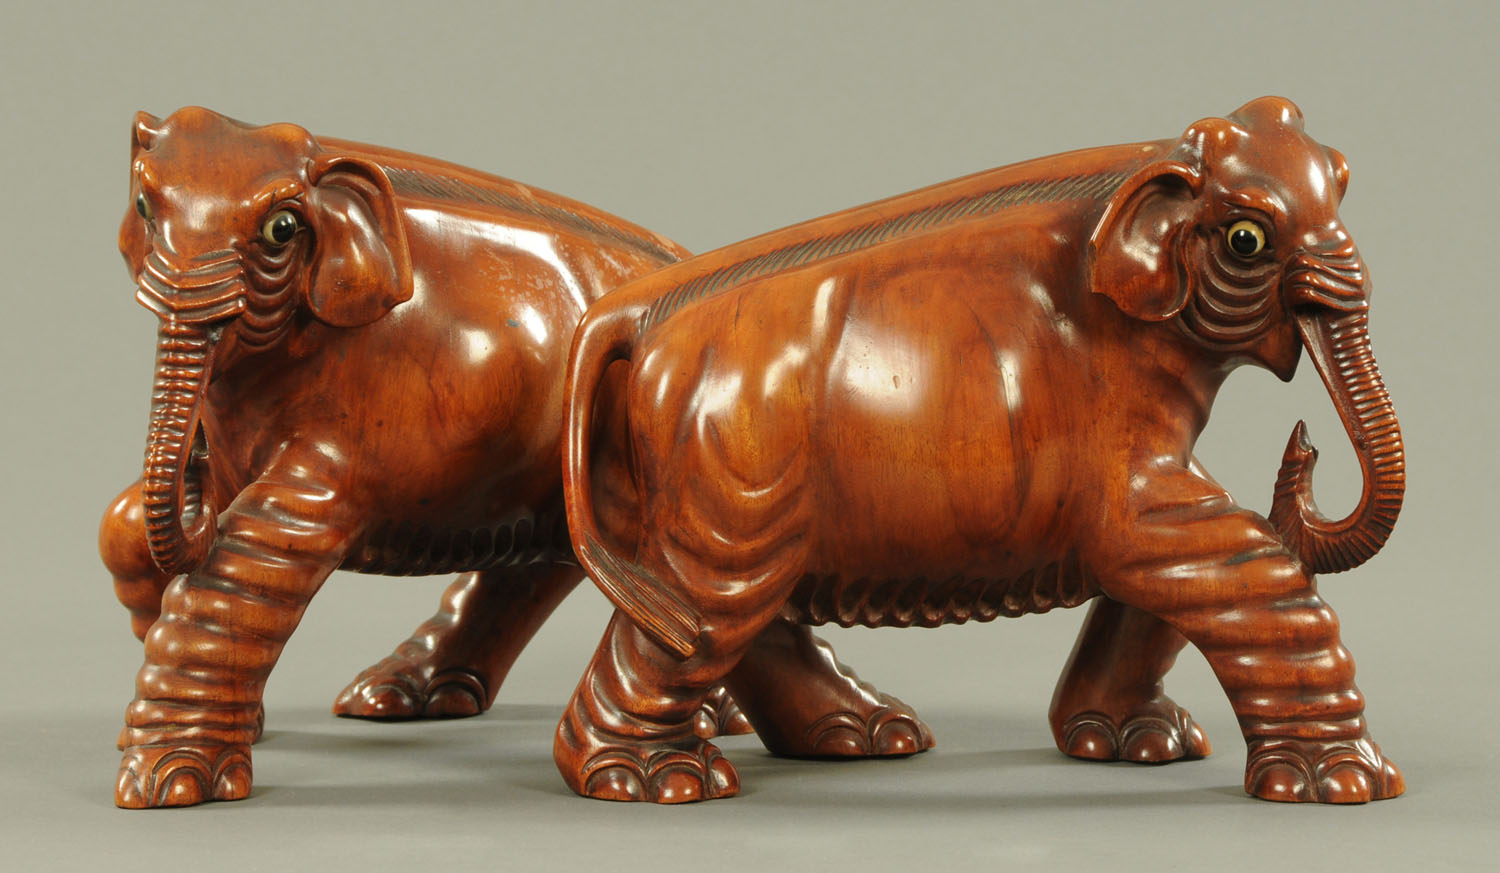 A pair of carved wood Indian elephants, early 20th century, each with inset glass eyes. Height 18.